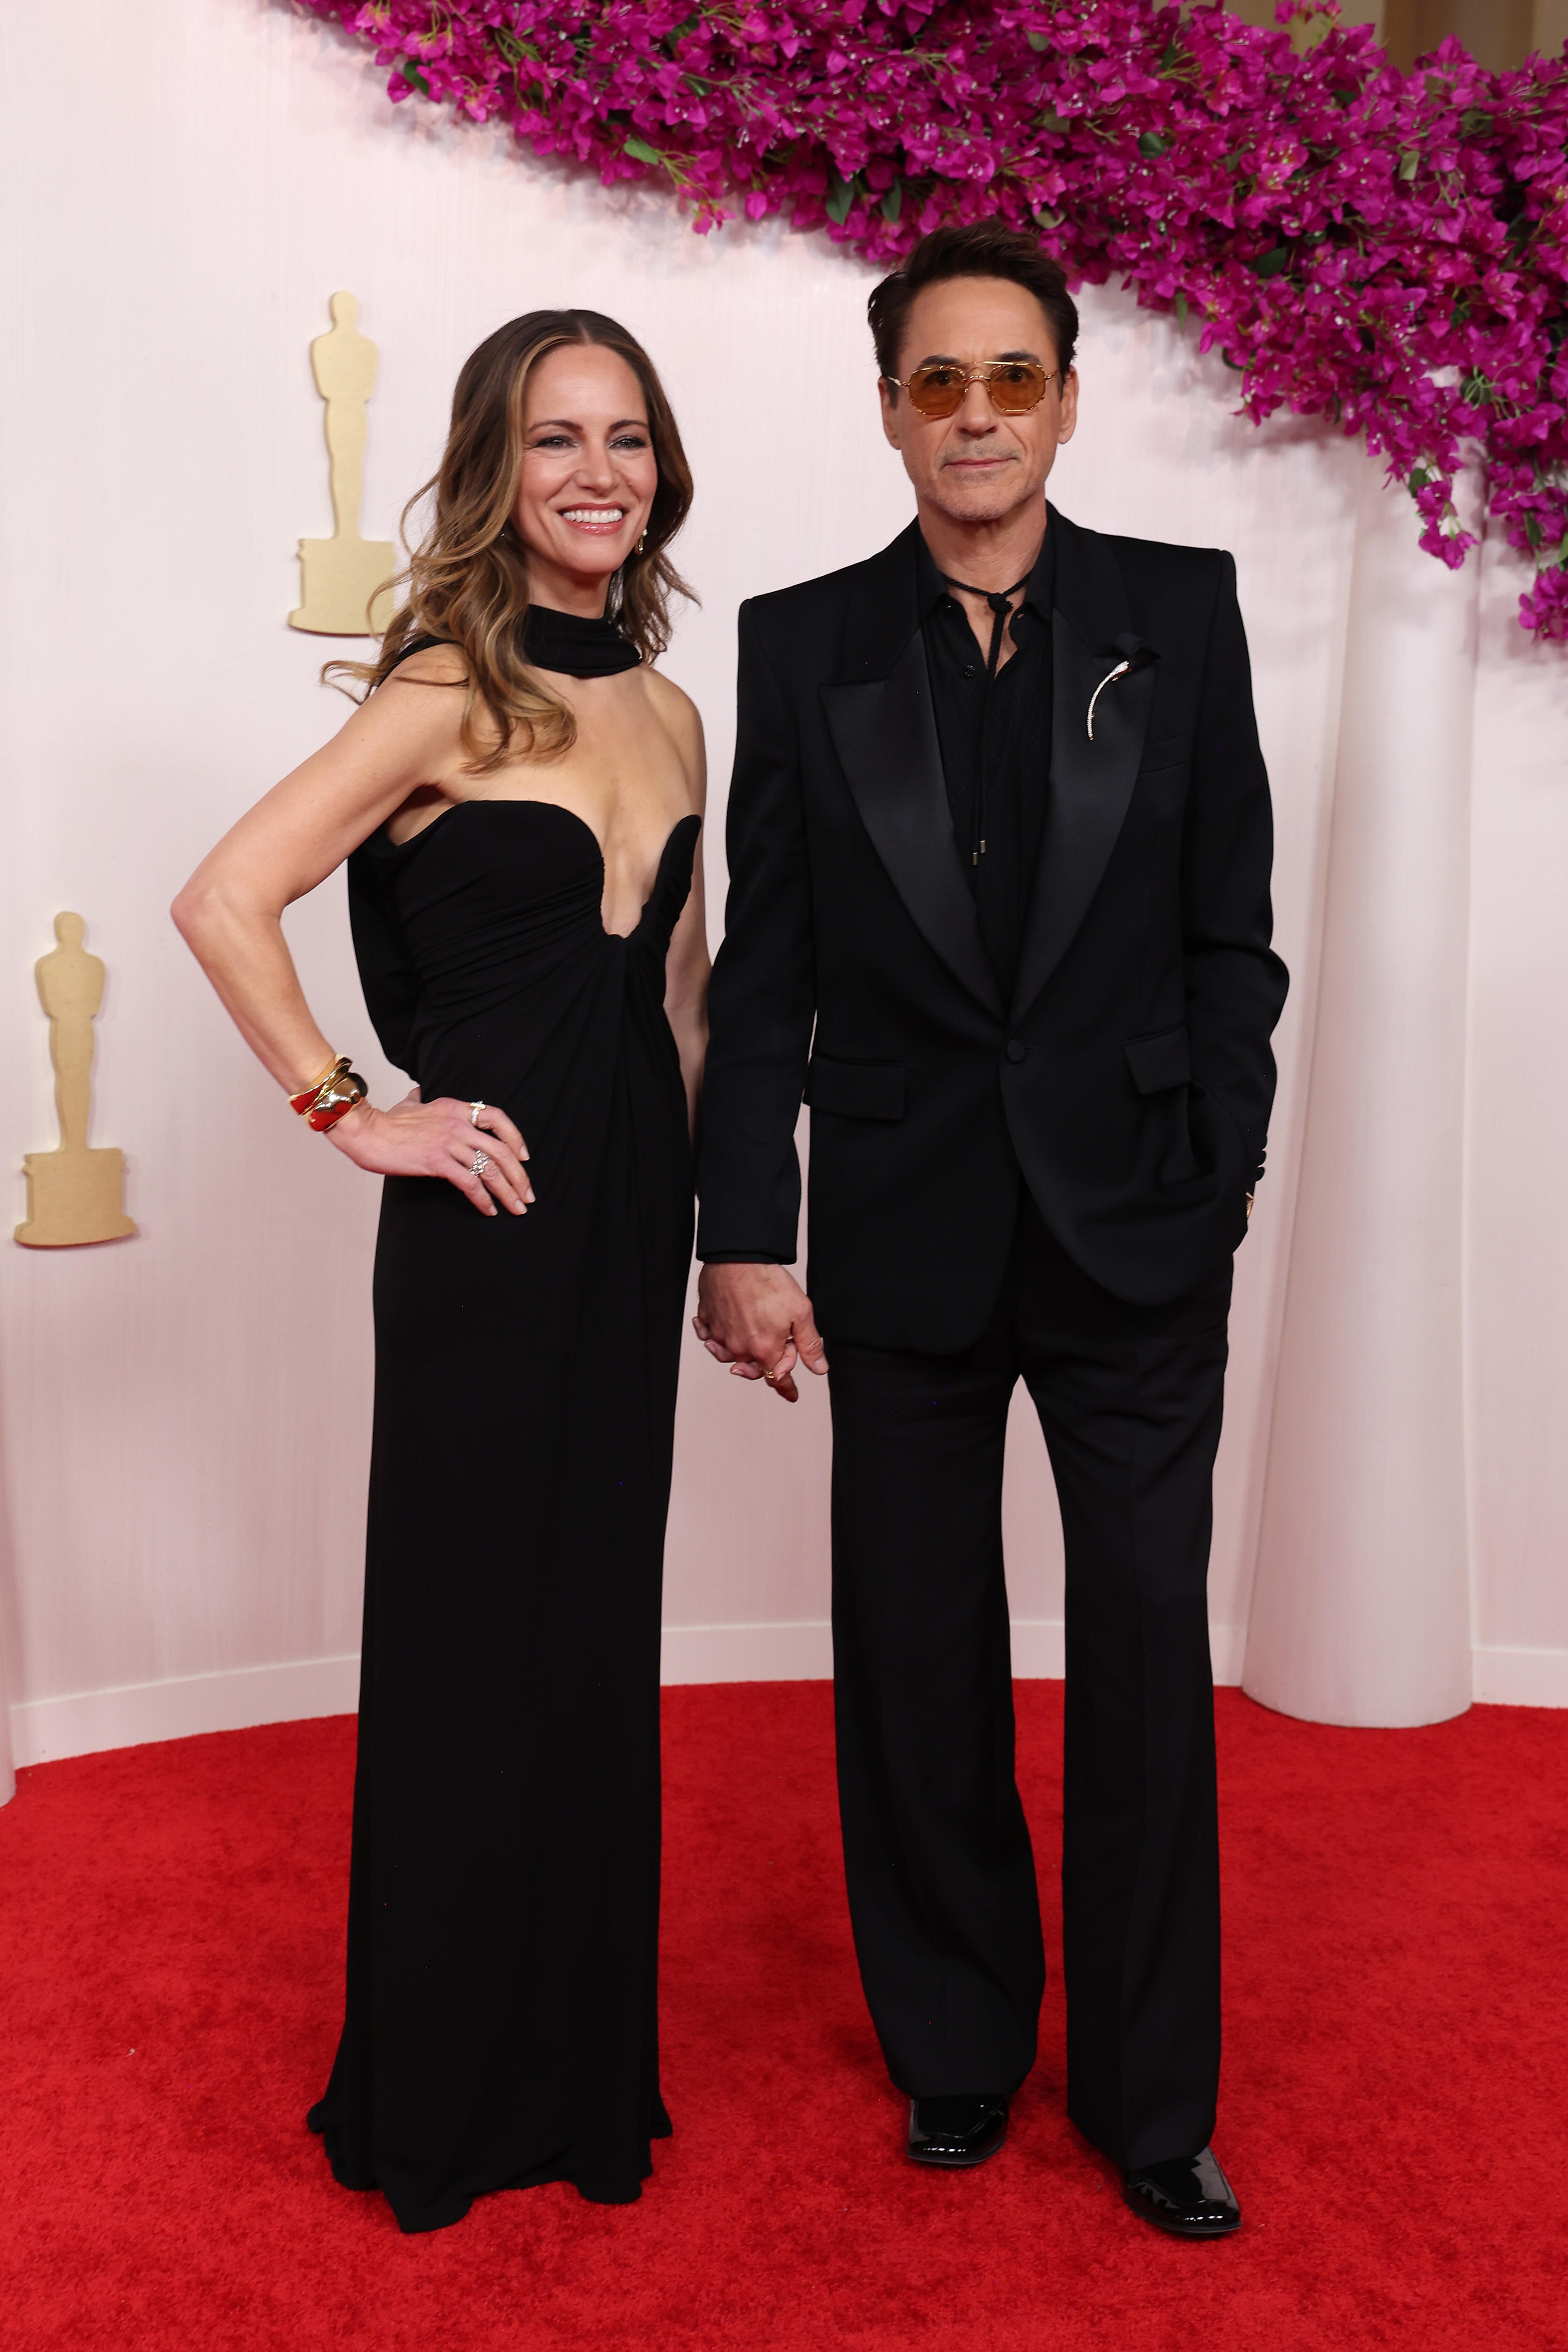 Susan Downey and Robert Downey Jr both wearing black on the Oscars red carpet